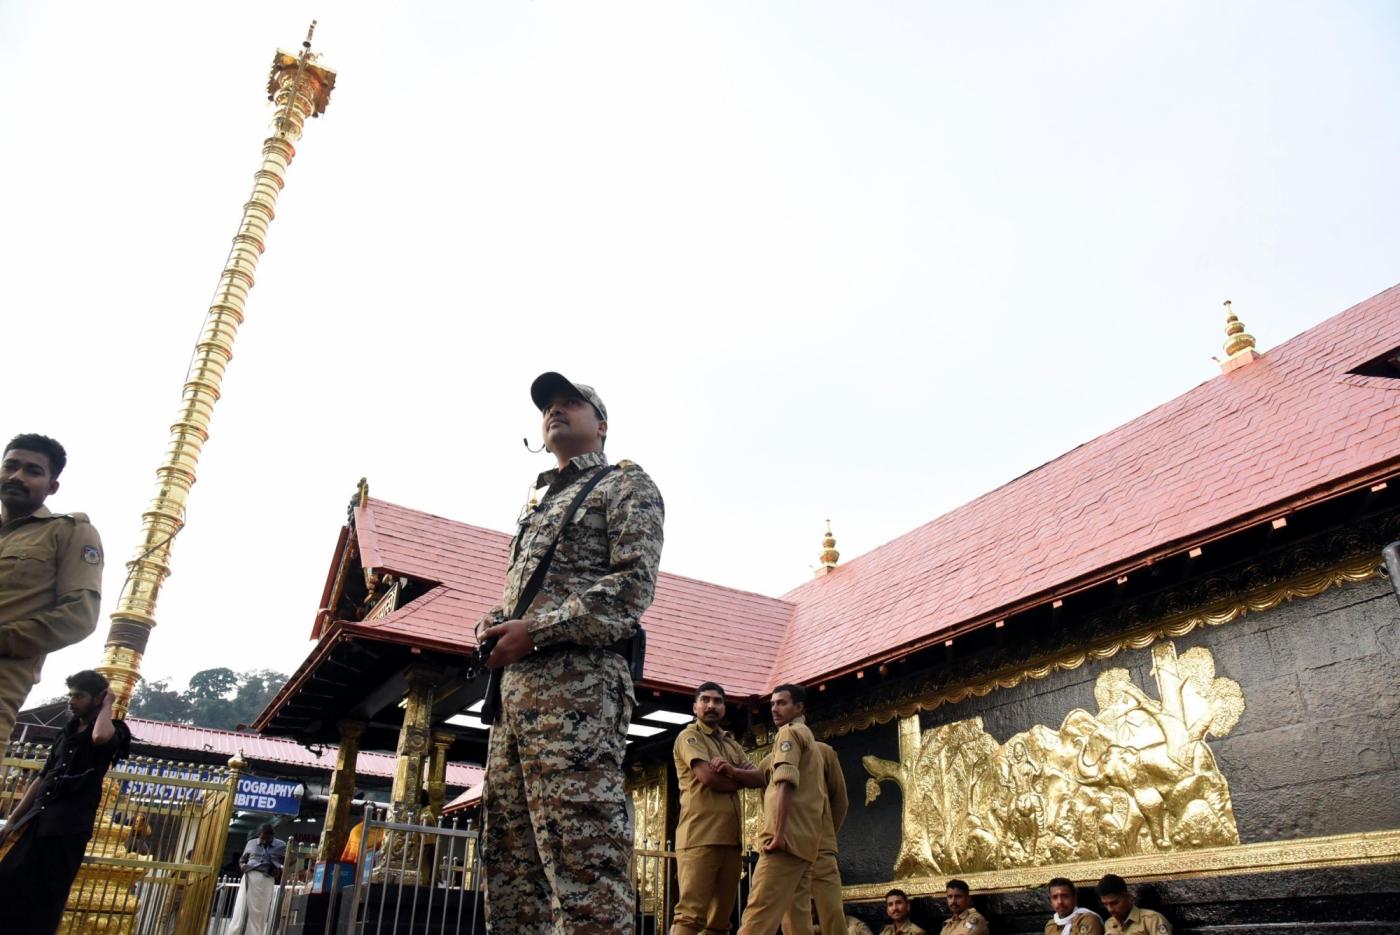 Pathanamthitta: A security personnel stands guard at the Sabarimala temple in Kerala's Pathanamthitta district on Nov 17, 2018. A Hindu group on Saturday called for a shutdown in Kerala following the "detention" of few religious leaders the previous night from the Sabarimala temple premises. The most prominent among the detained on Friday night were Hindu Iykavedi (HI) President and senior BJP leader K.P. Sasikala. She was detained while proceeding towards the Lord Ayyappa shrine. (Photo: IANS) by .